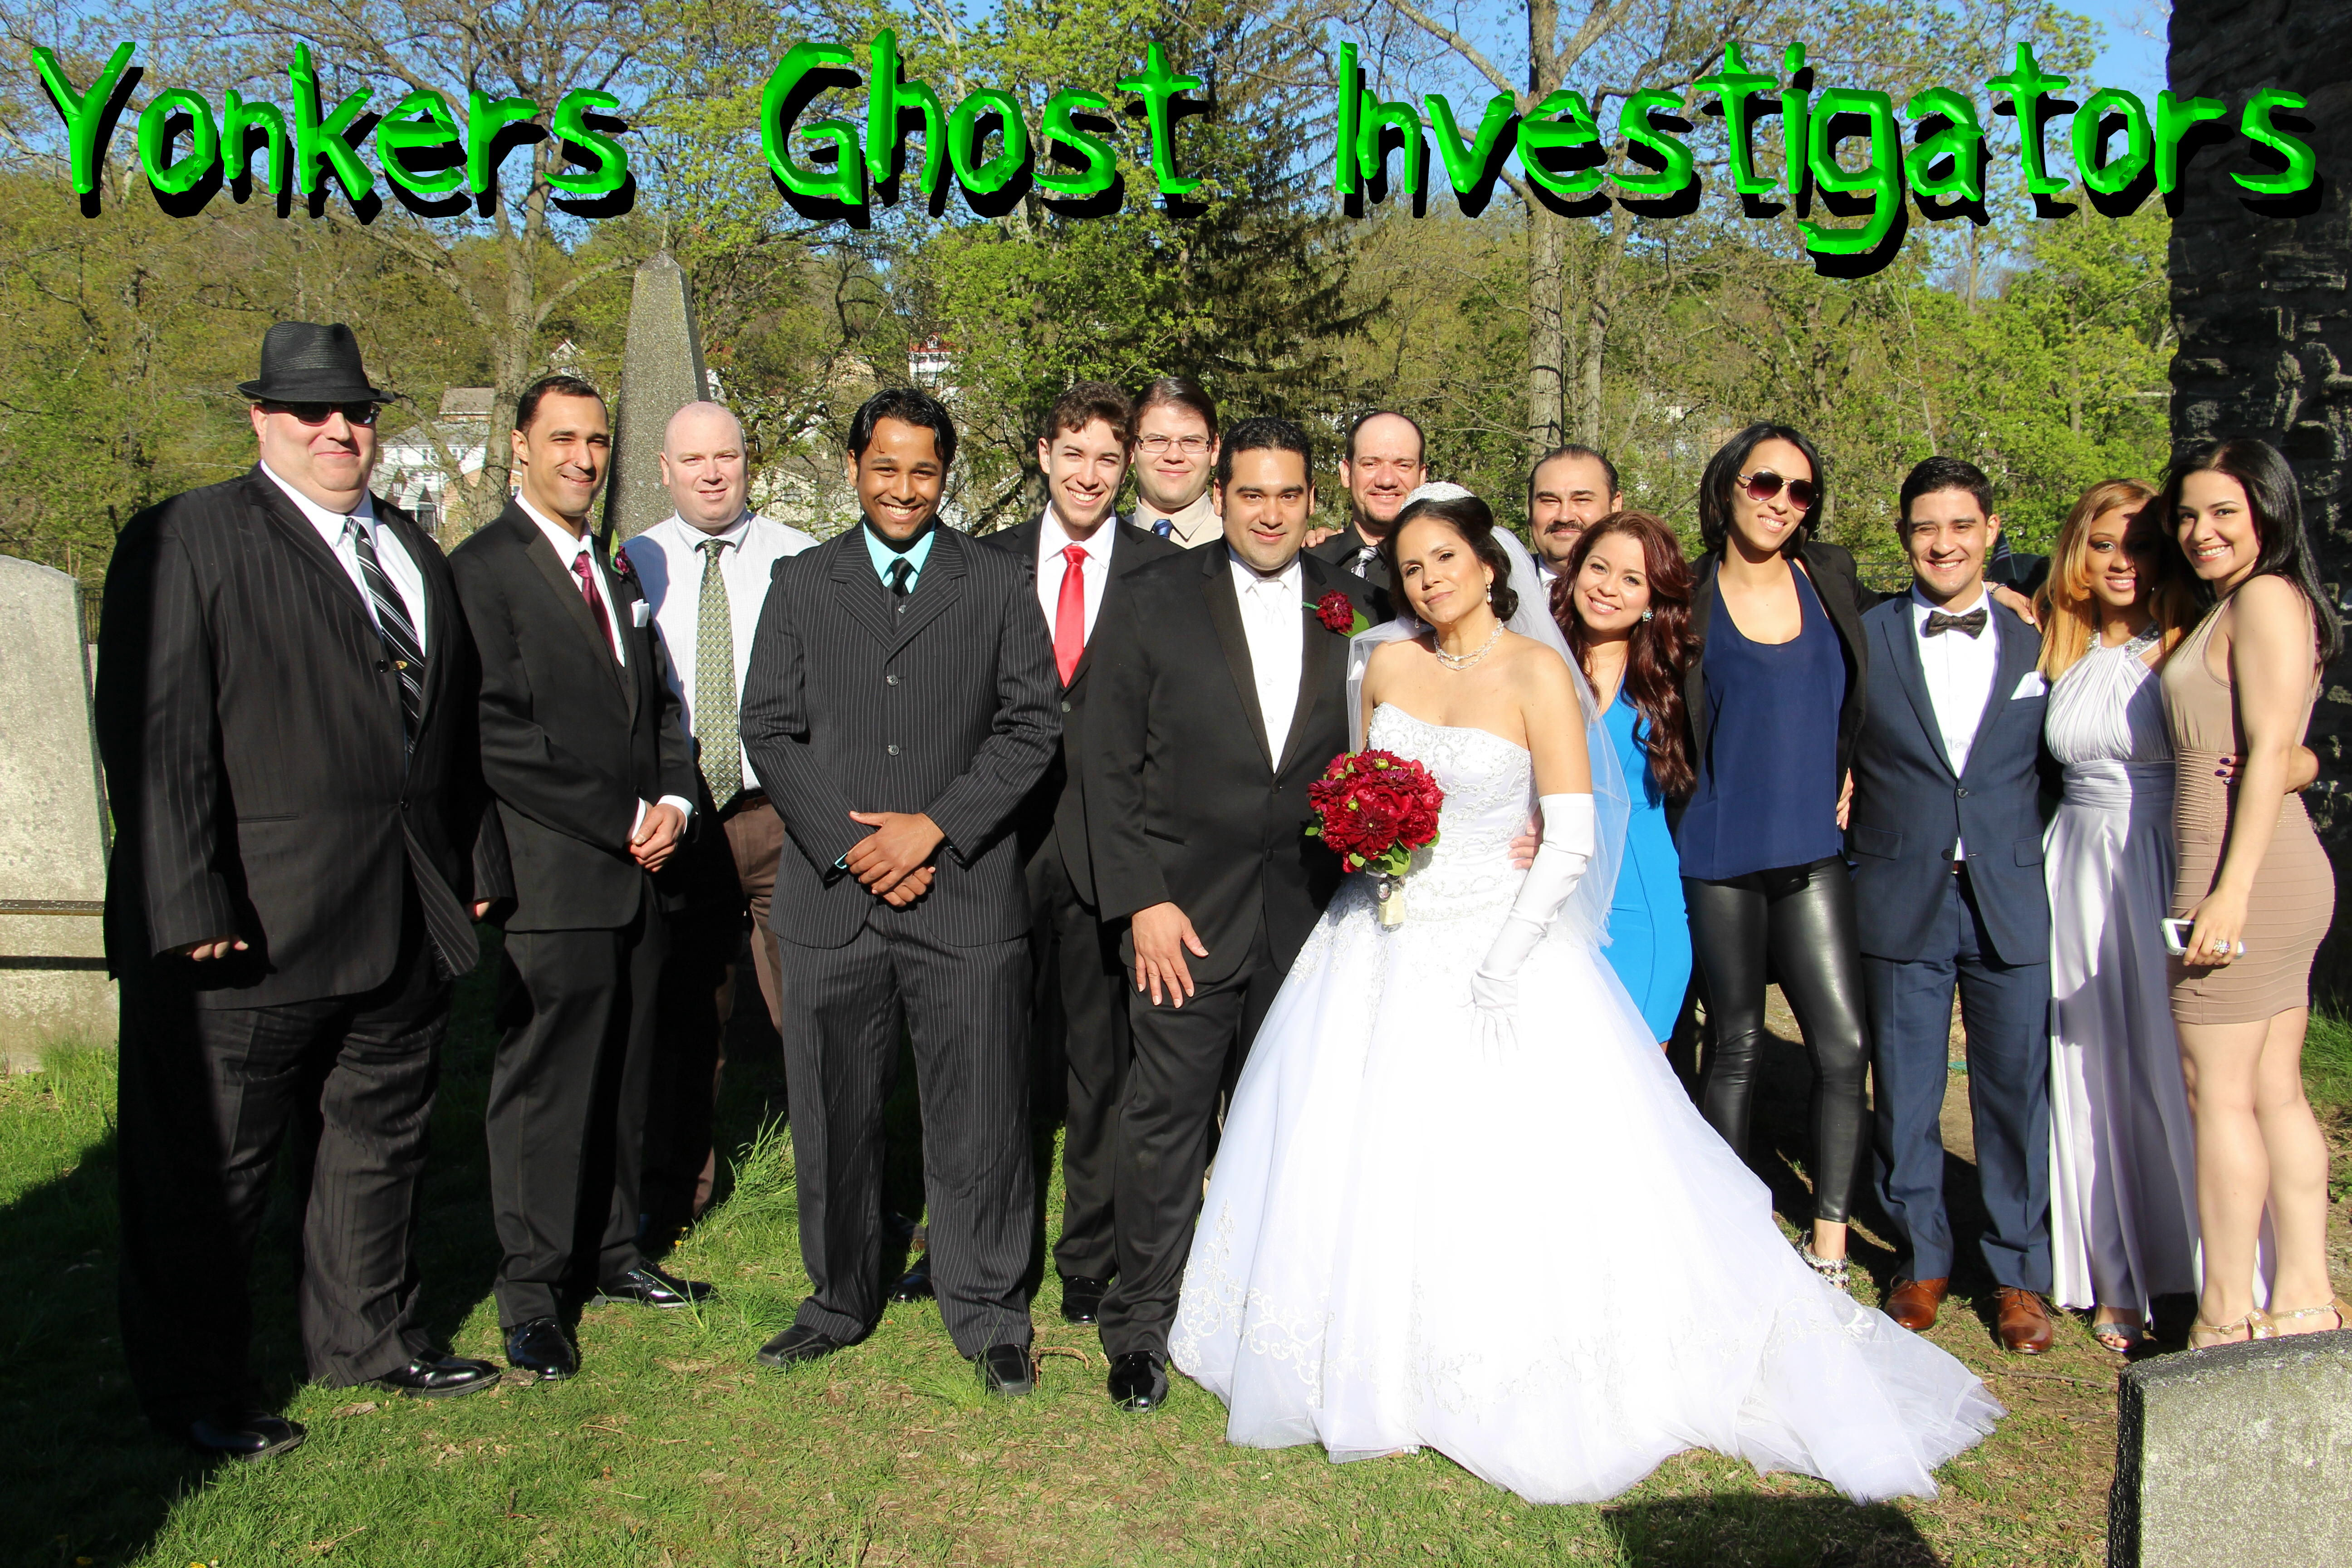 Most of the current and former members of the Westchester Ghost Investigators at Jason and Jo-Ann's wedding - Courtesy: Yonkers Ghost Investigators